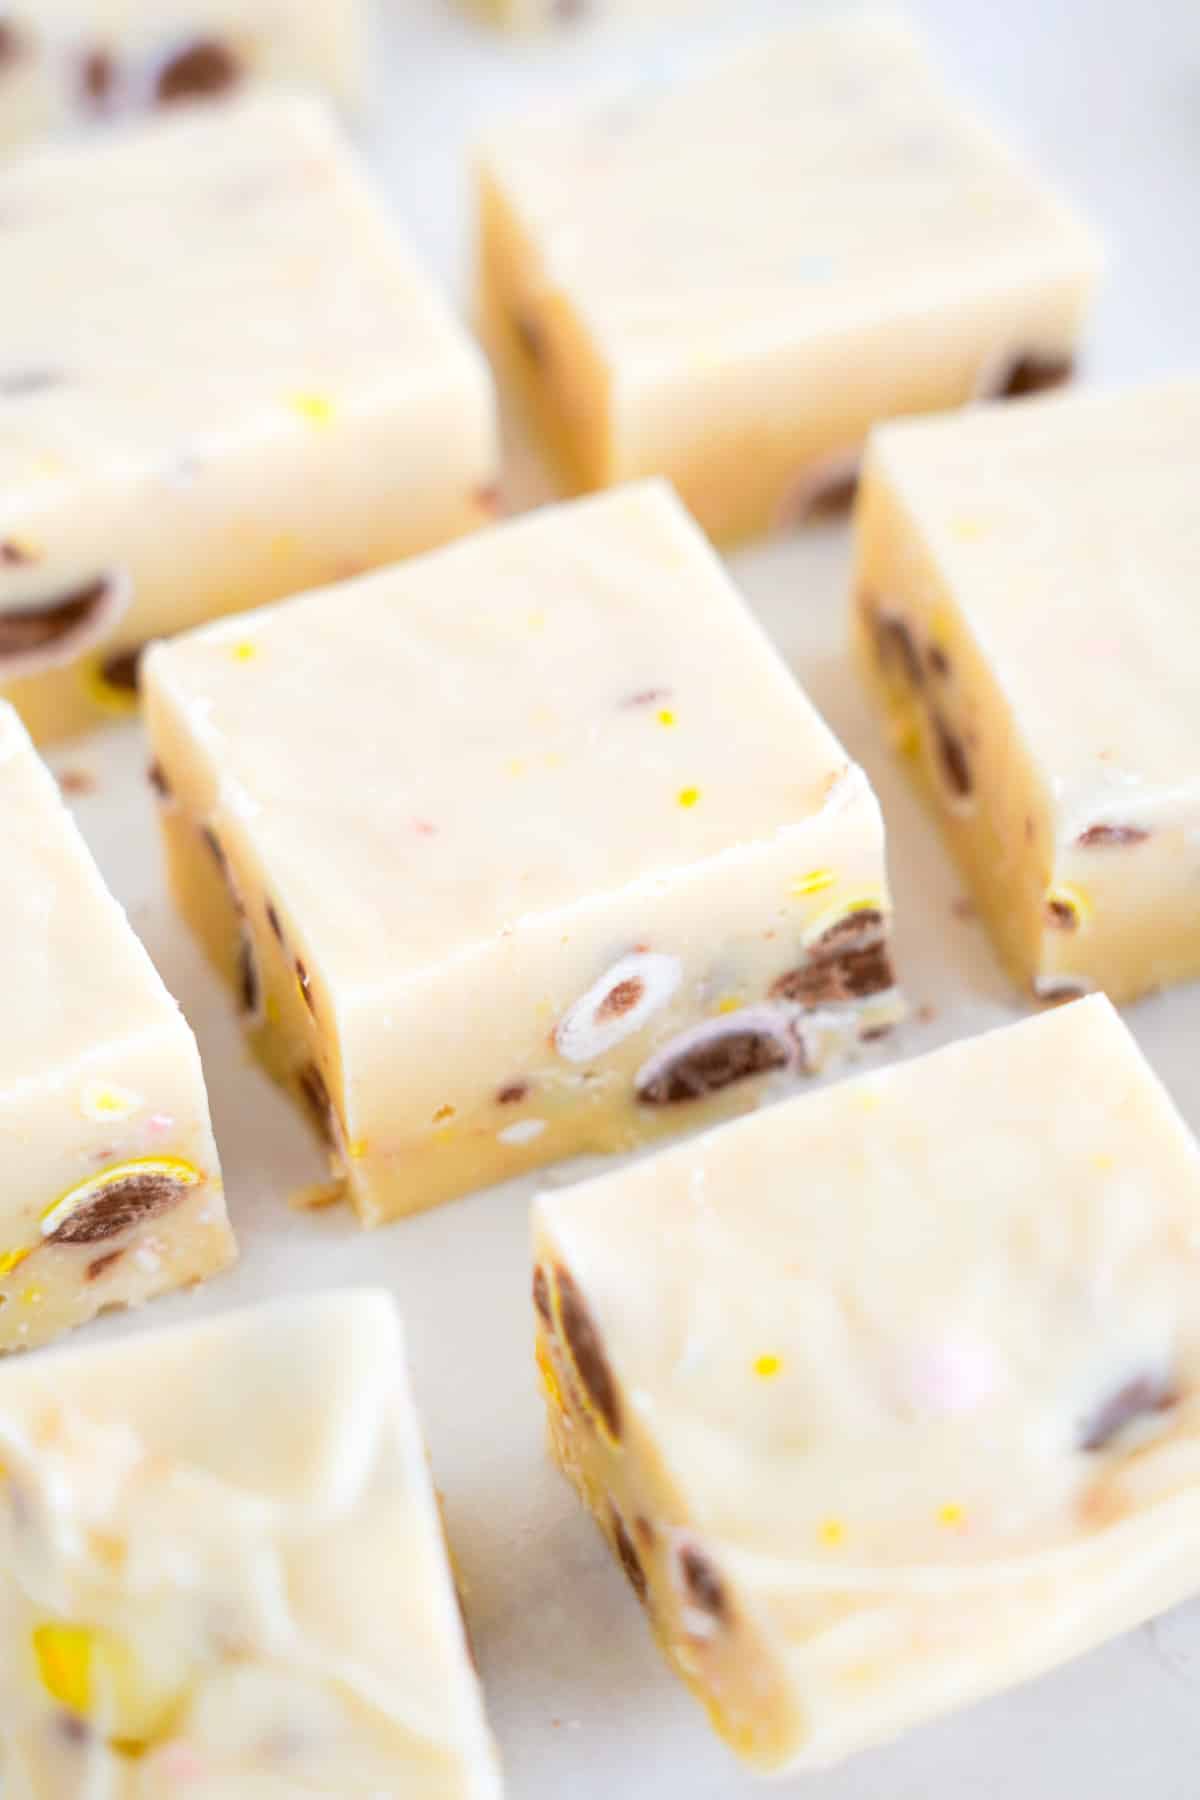 Slices of white chocolate fudge with chocolate mini egg bits inside close up on a counter.